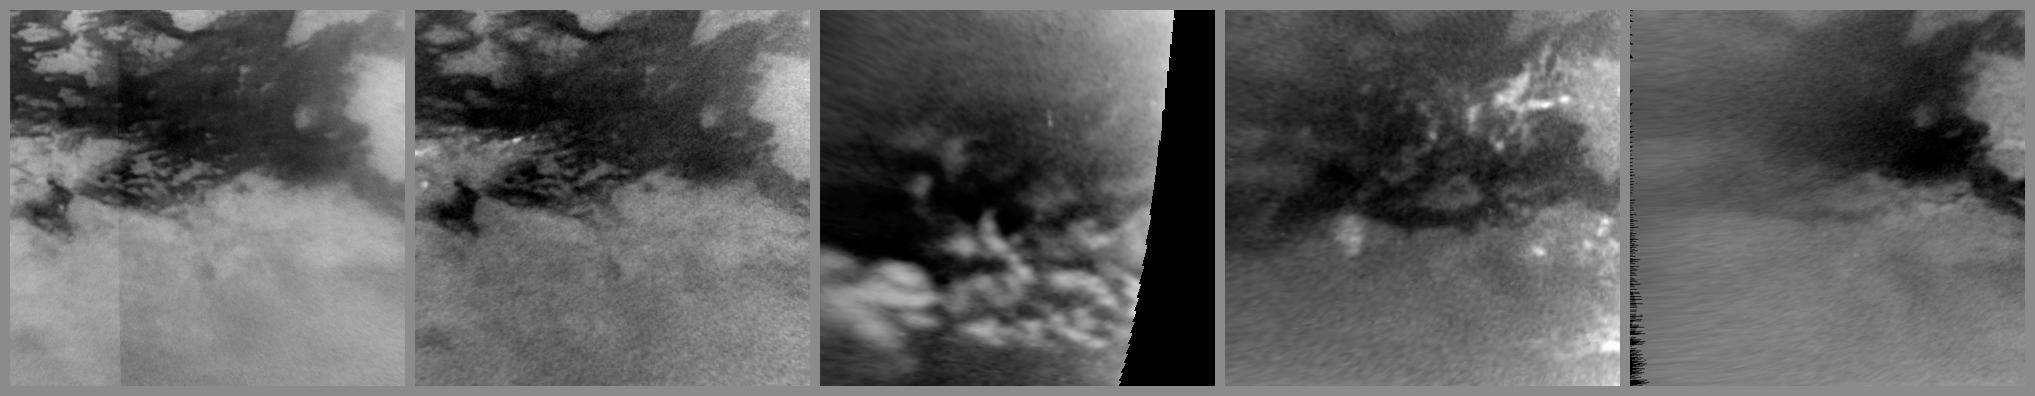 This series of images from NASA's Cassini spacecraft shows changes on the surface of Saturn's moon Titan, as the transition to northern spring brings methane rains to the moon's equatorial latitudes. Some of the most significant changes appear within a period of only a couple of weeks.